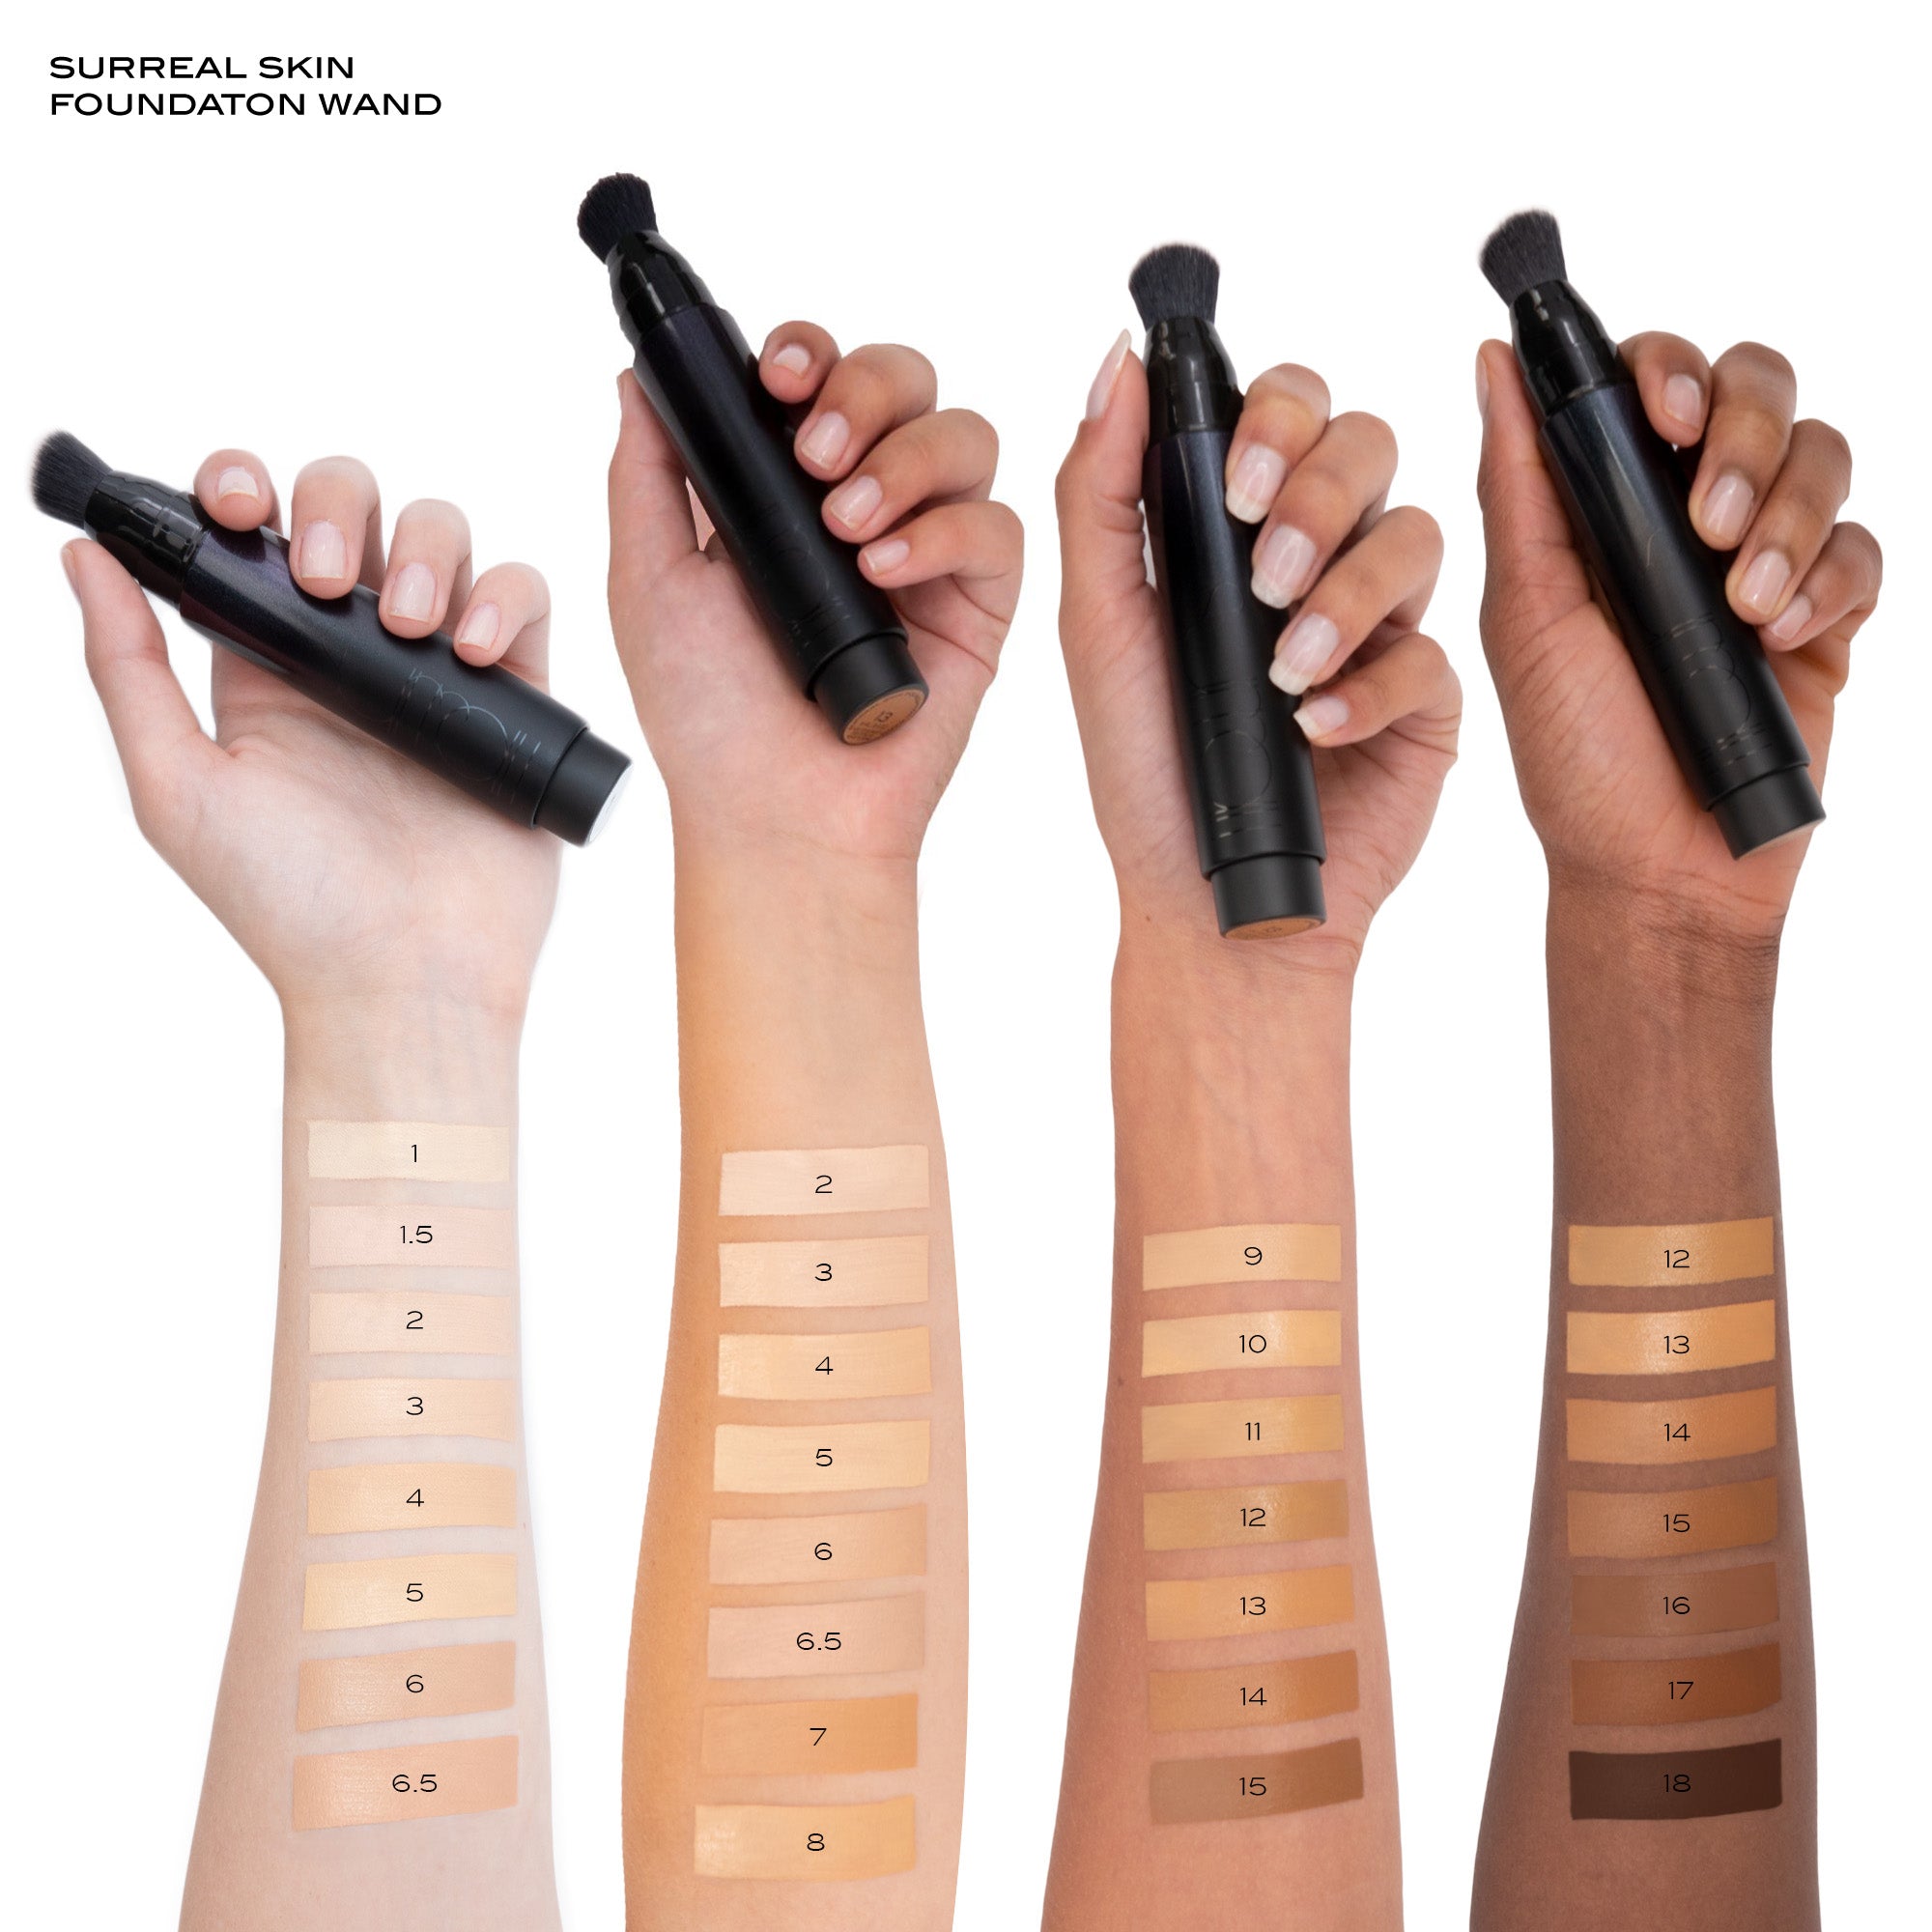 ALLVAR - surreal skin foundation wand swatches on various skin tones